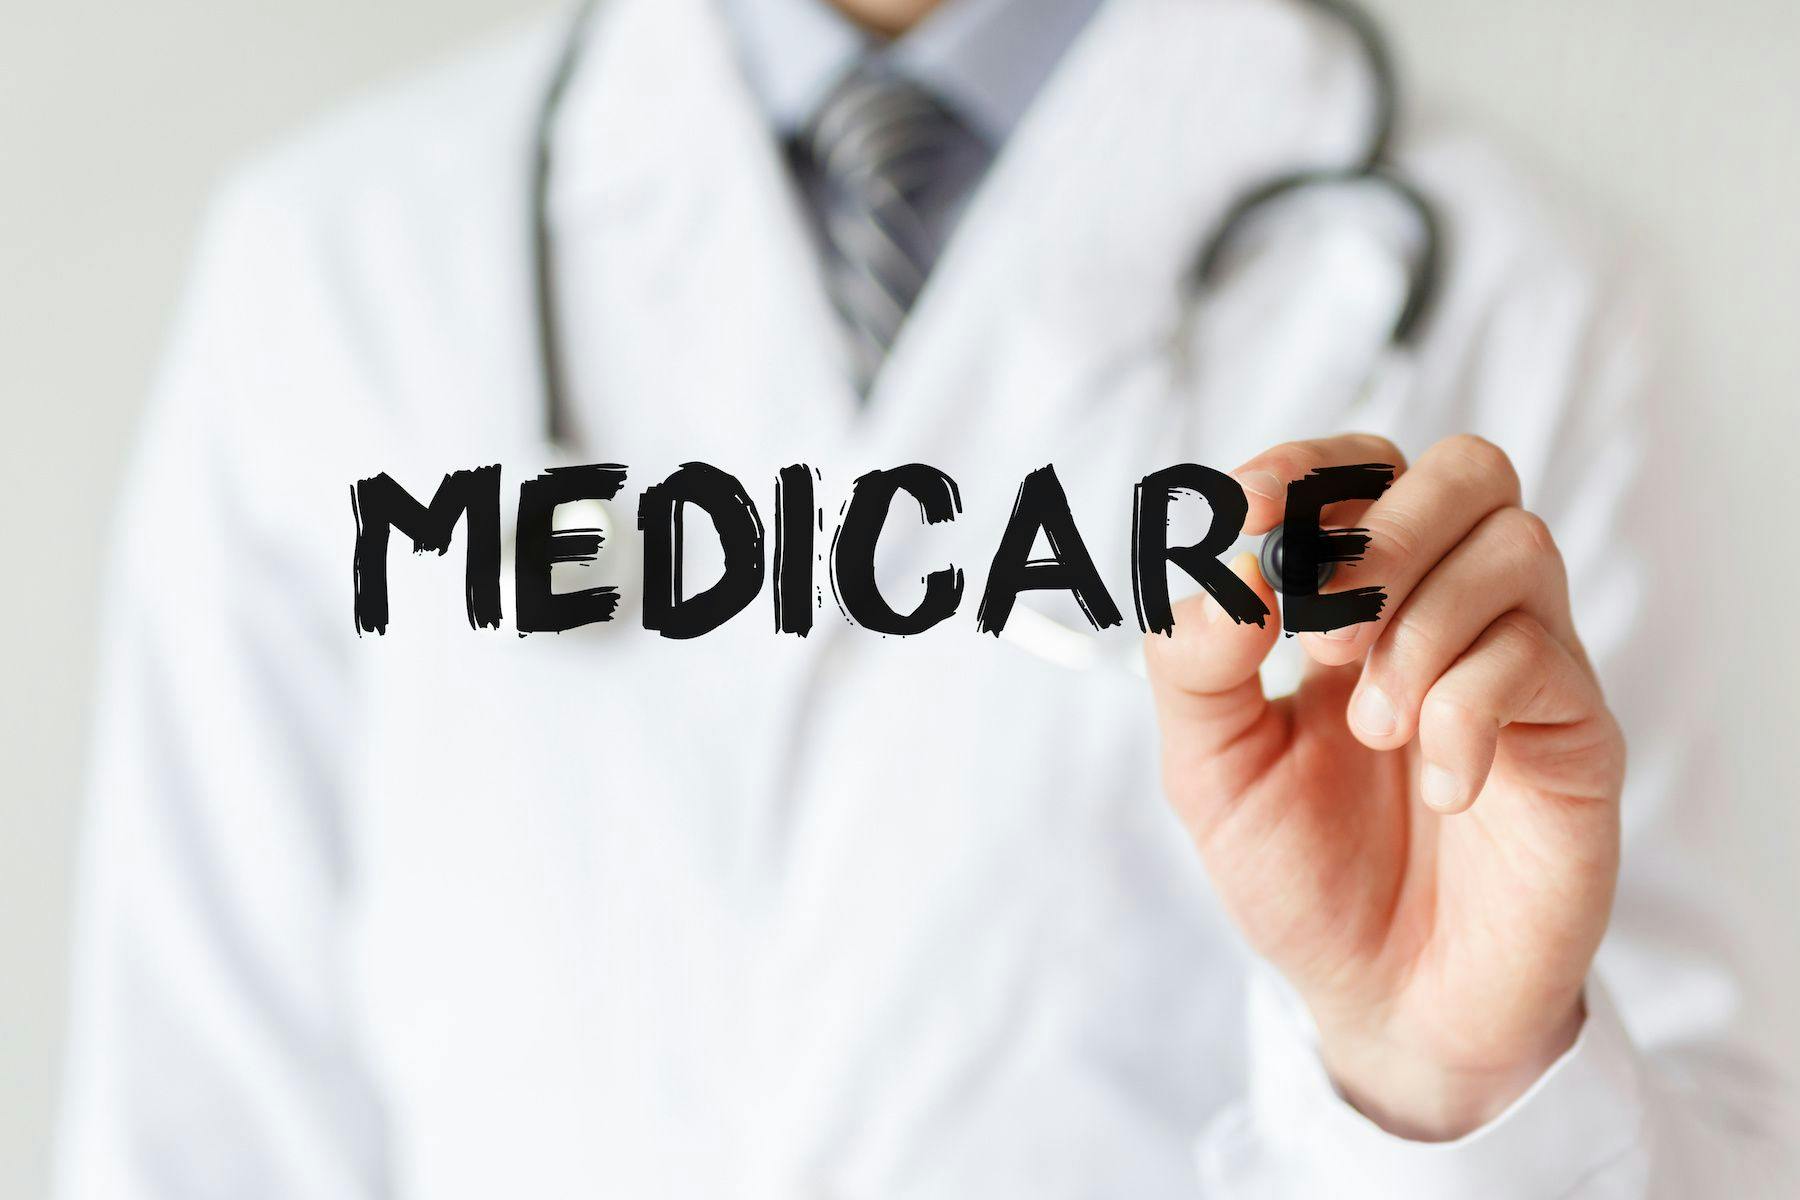 Medicare drug costs are expected to decrease of manufacturers raise prices faster than the rate of inflation. | image credit: MP Studio / stock.adobe.com 